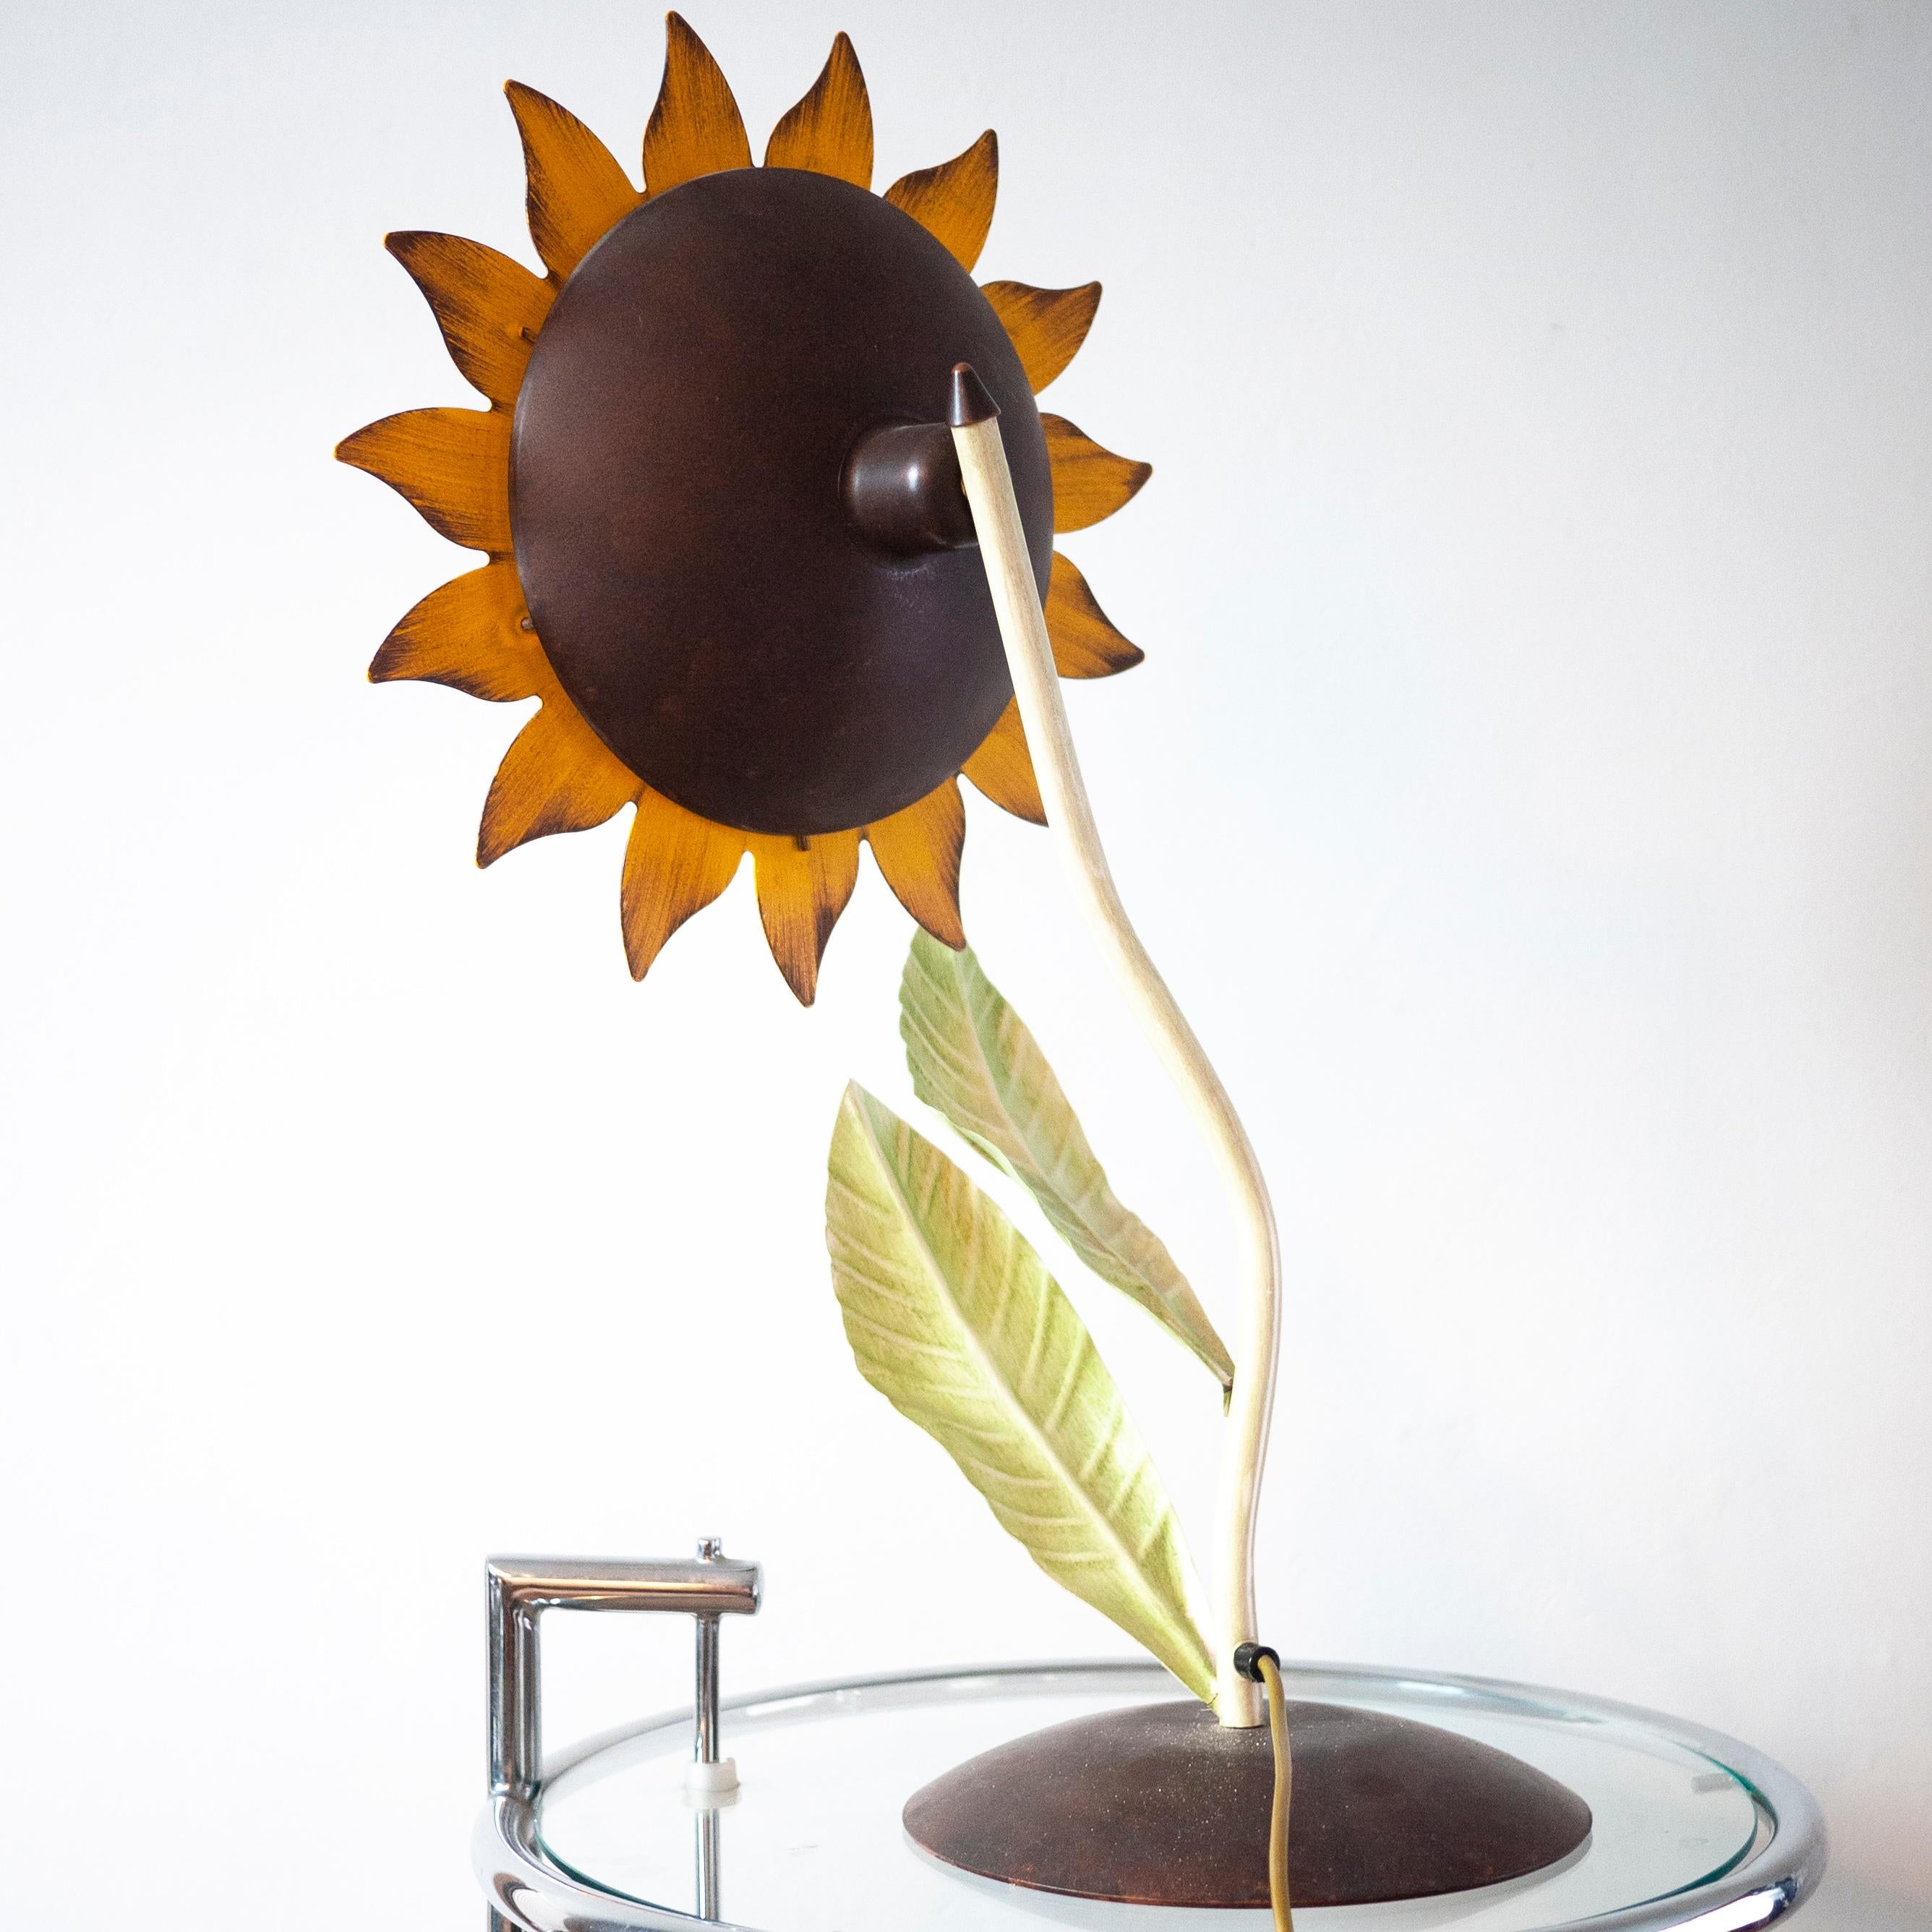 Decorative Midcentury Italian Metal Painted Sunflower Table Lamp, 1970s For Sale 3